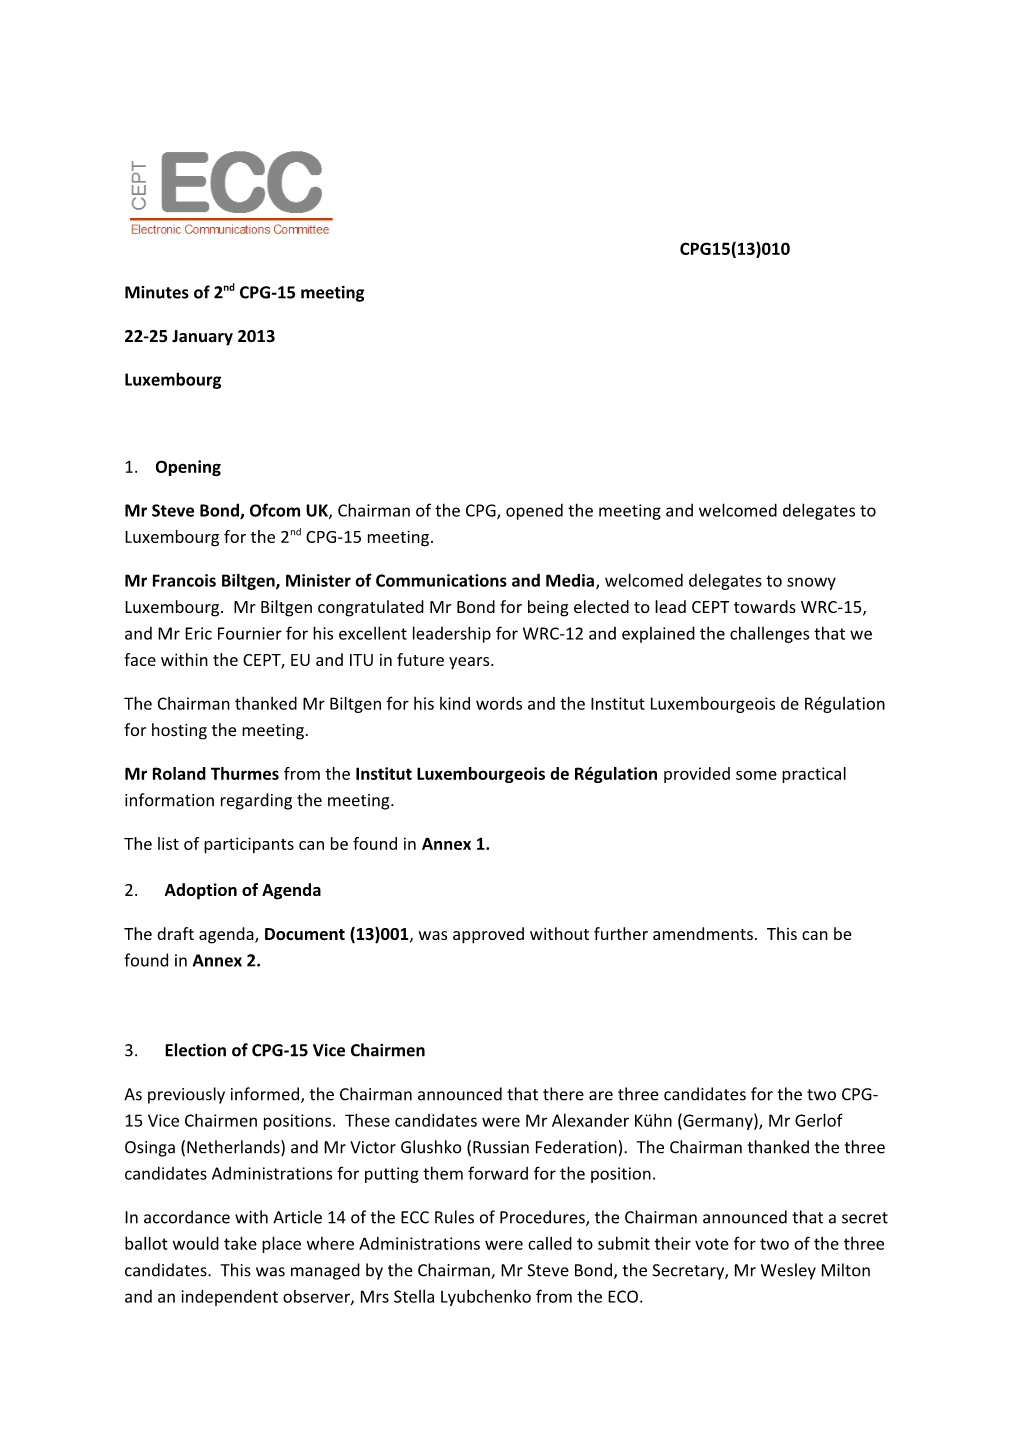 Minutes of 2Nd CPG-15 Meeting